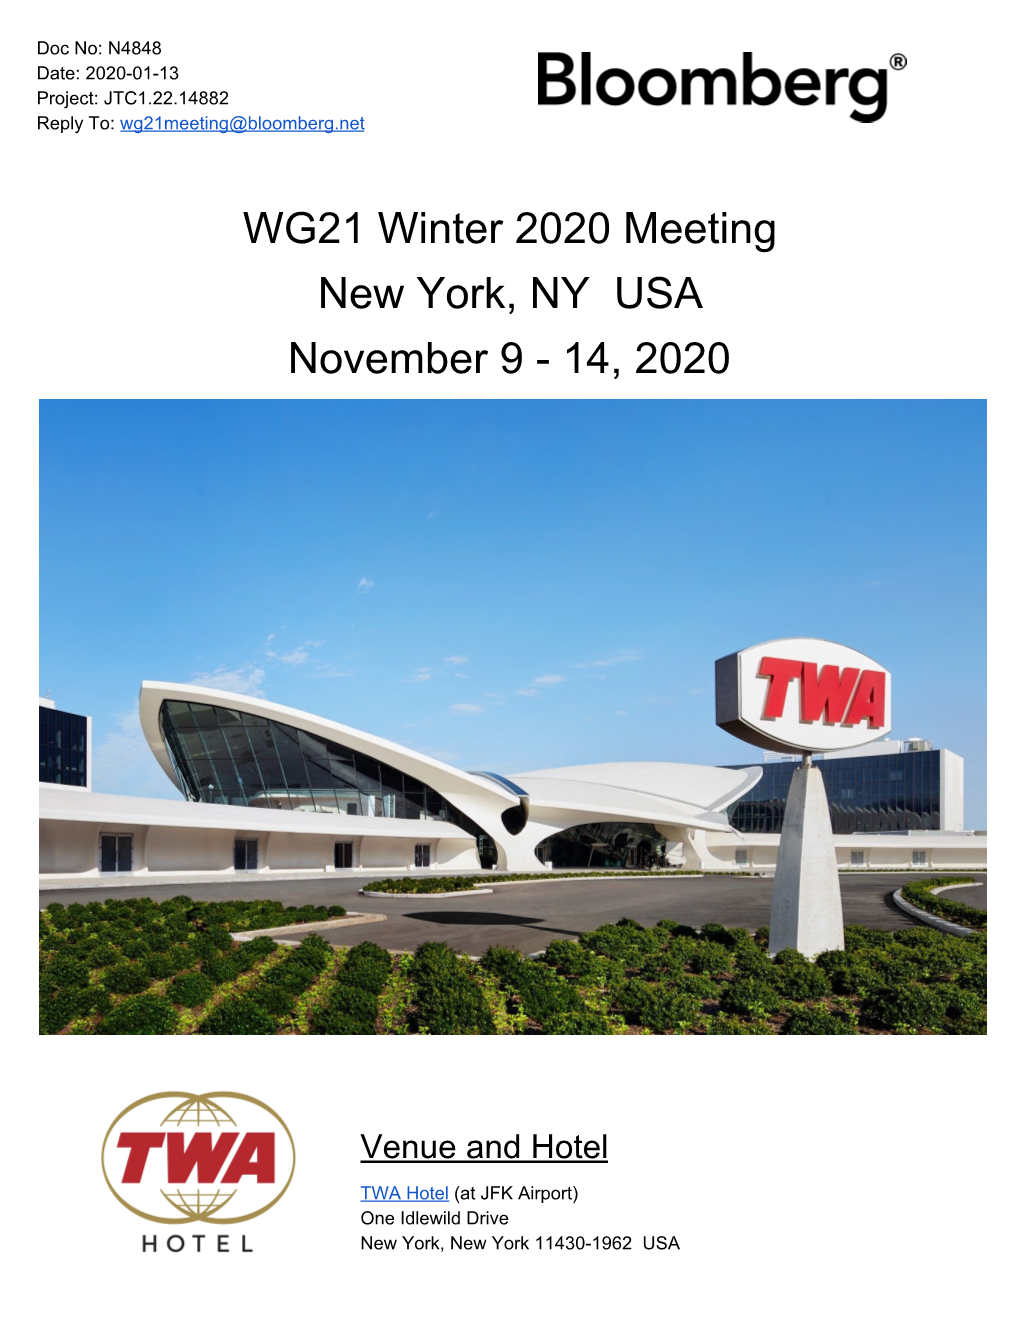 N4848 Date: 2020-01-13 Project: JTC1.22.14882 Reply To: Wg21meeting@Bloomberg.Net ​